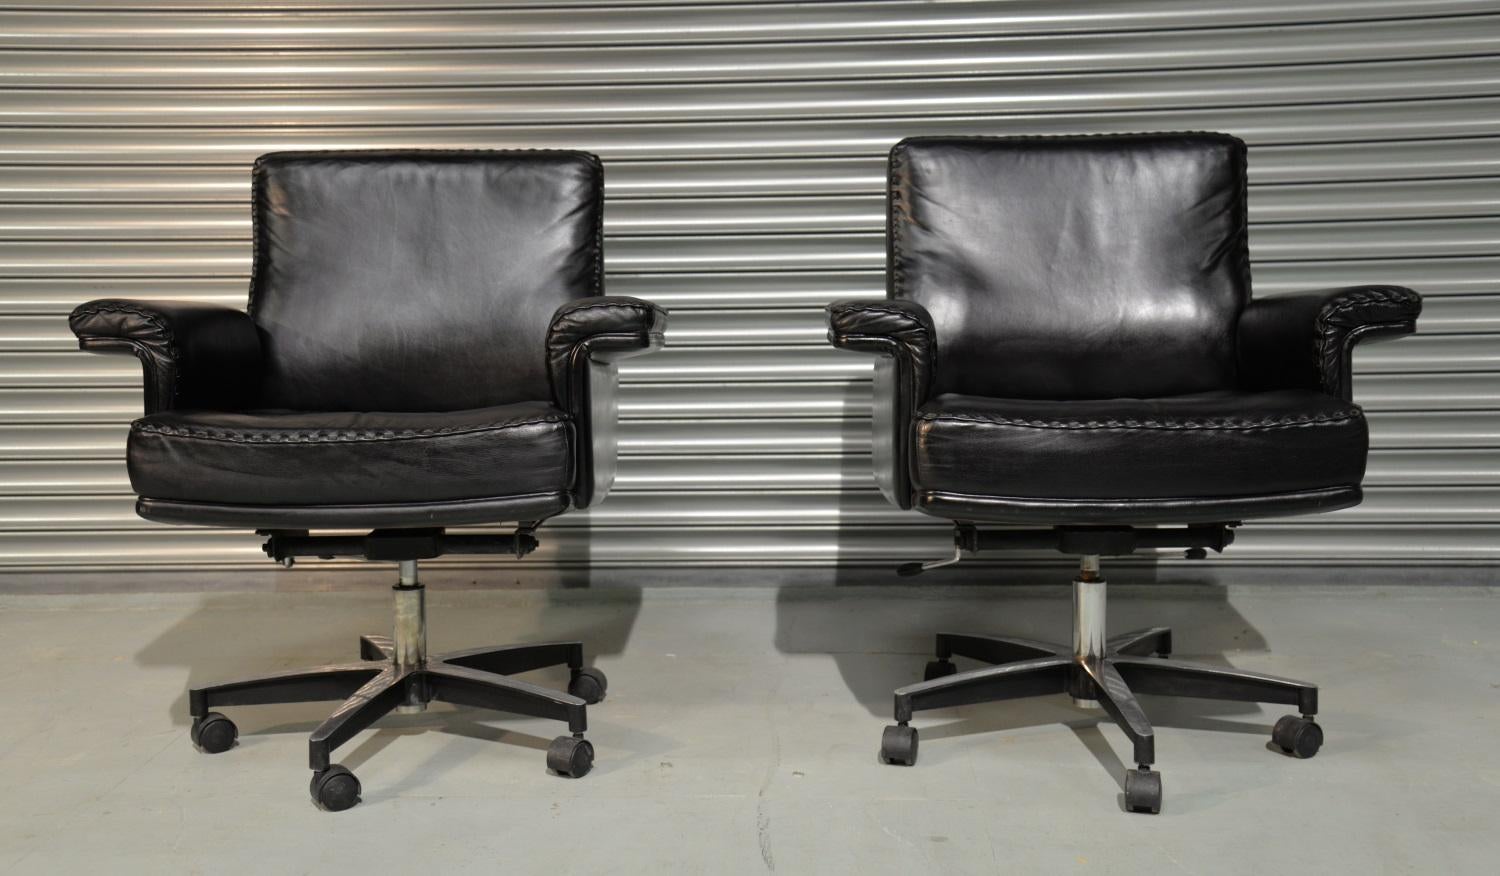 
Discounted shipping rates for our US and International customers ( from 2 weeks door to door ) 

We are delighted to bring to you an extremely rare pair of vintage De Sede DS 35 armchairs on casters. Built in the 1960s to incredibly high standards